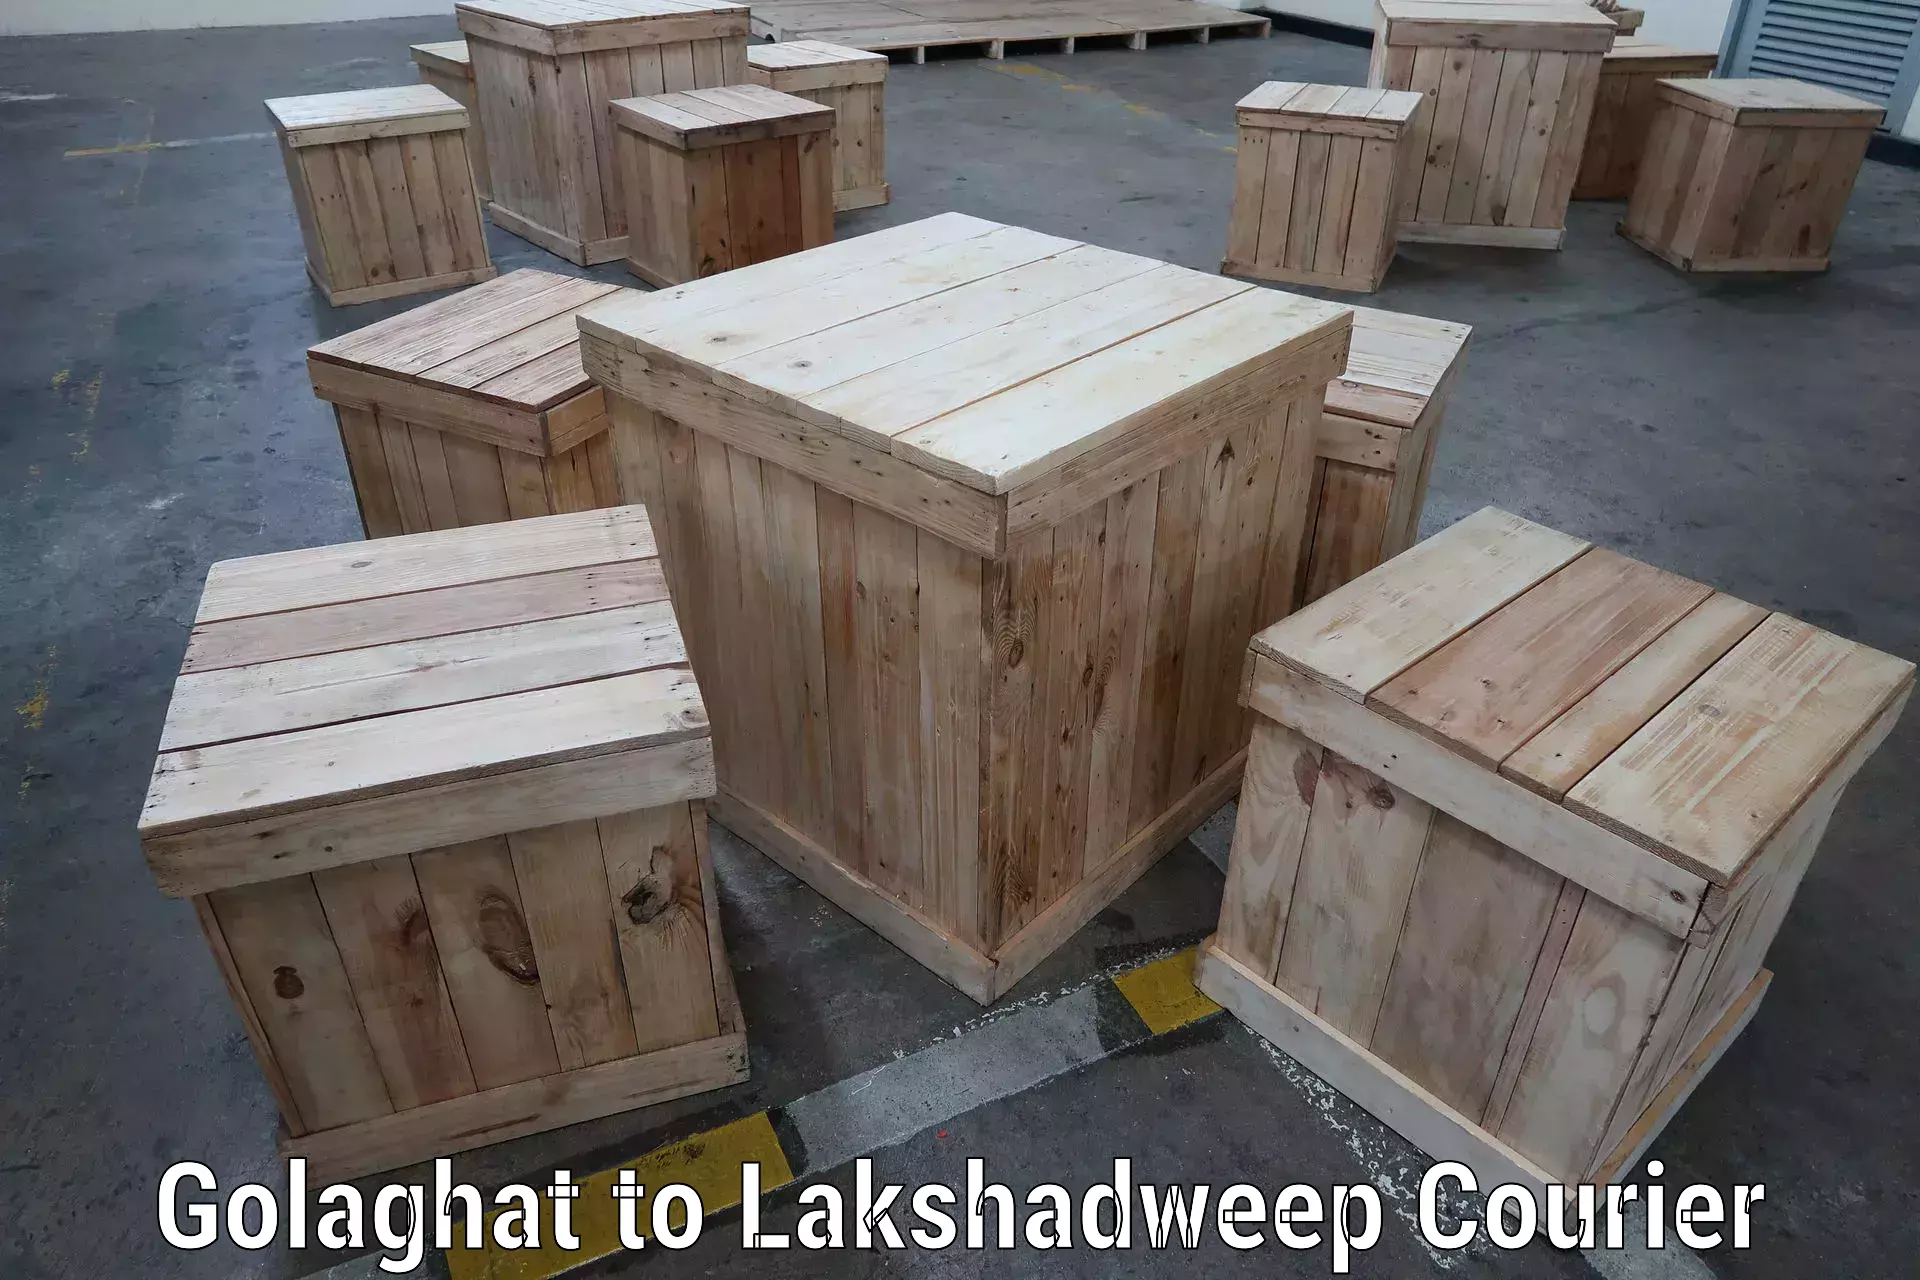 Express delivery capabilities Golaghat to Lakshadweep